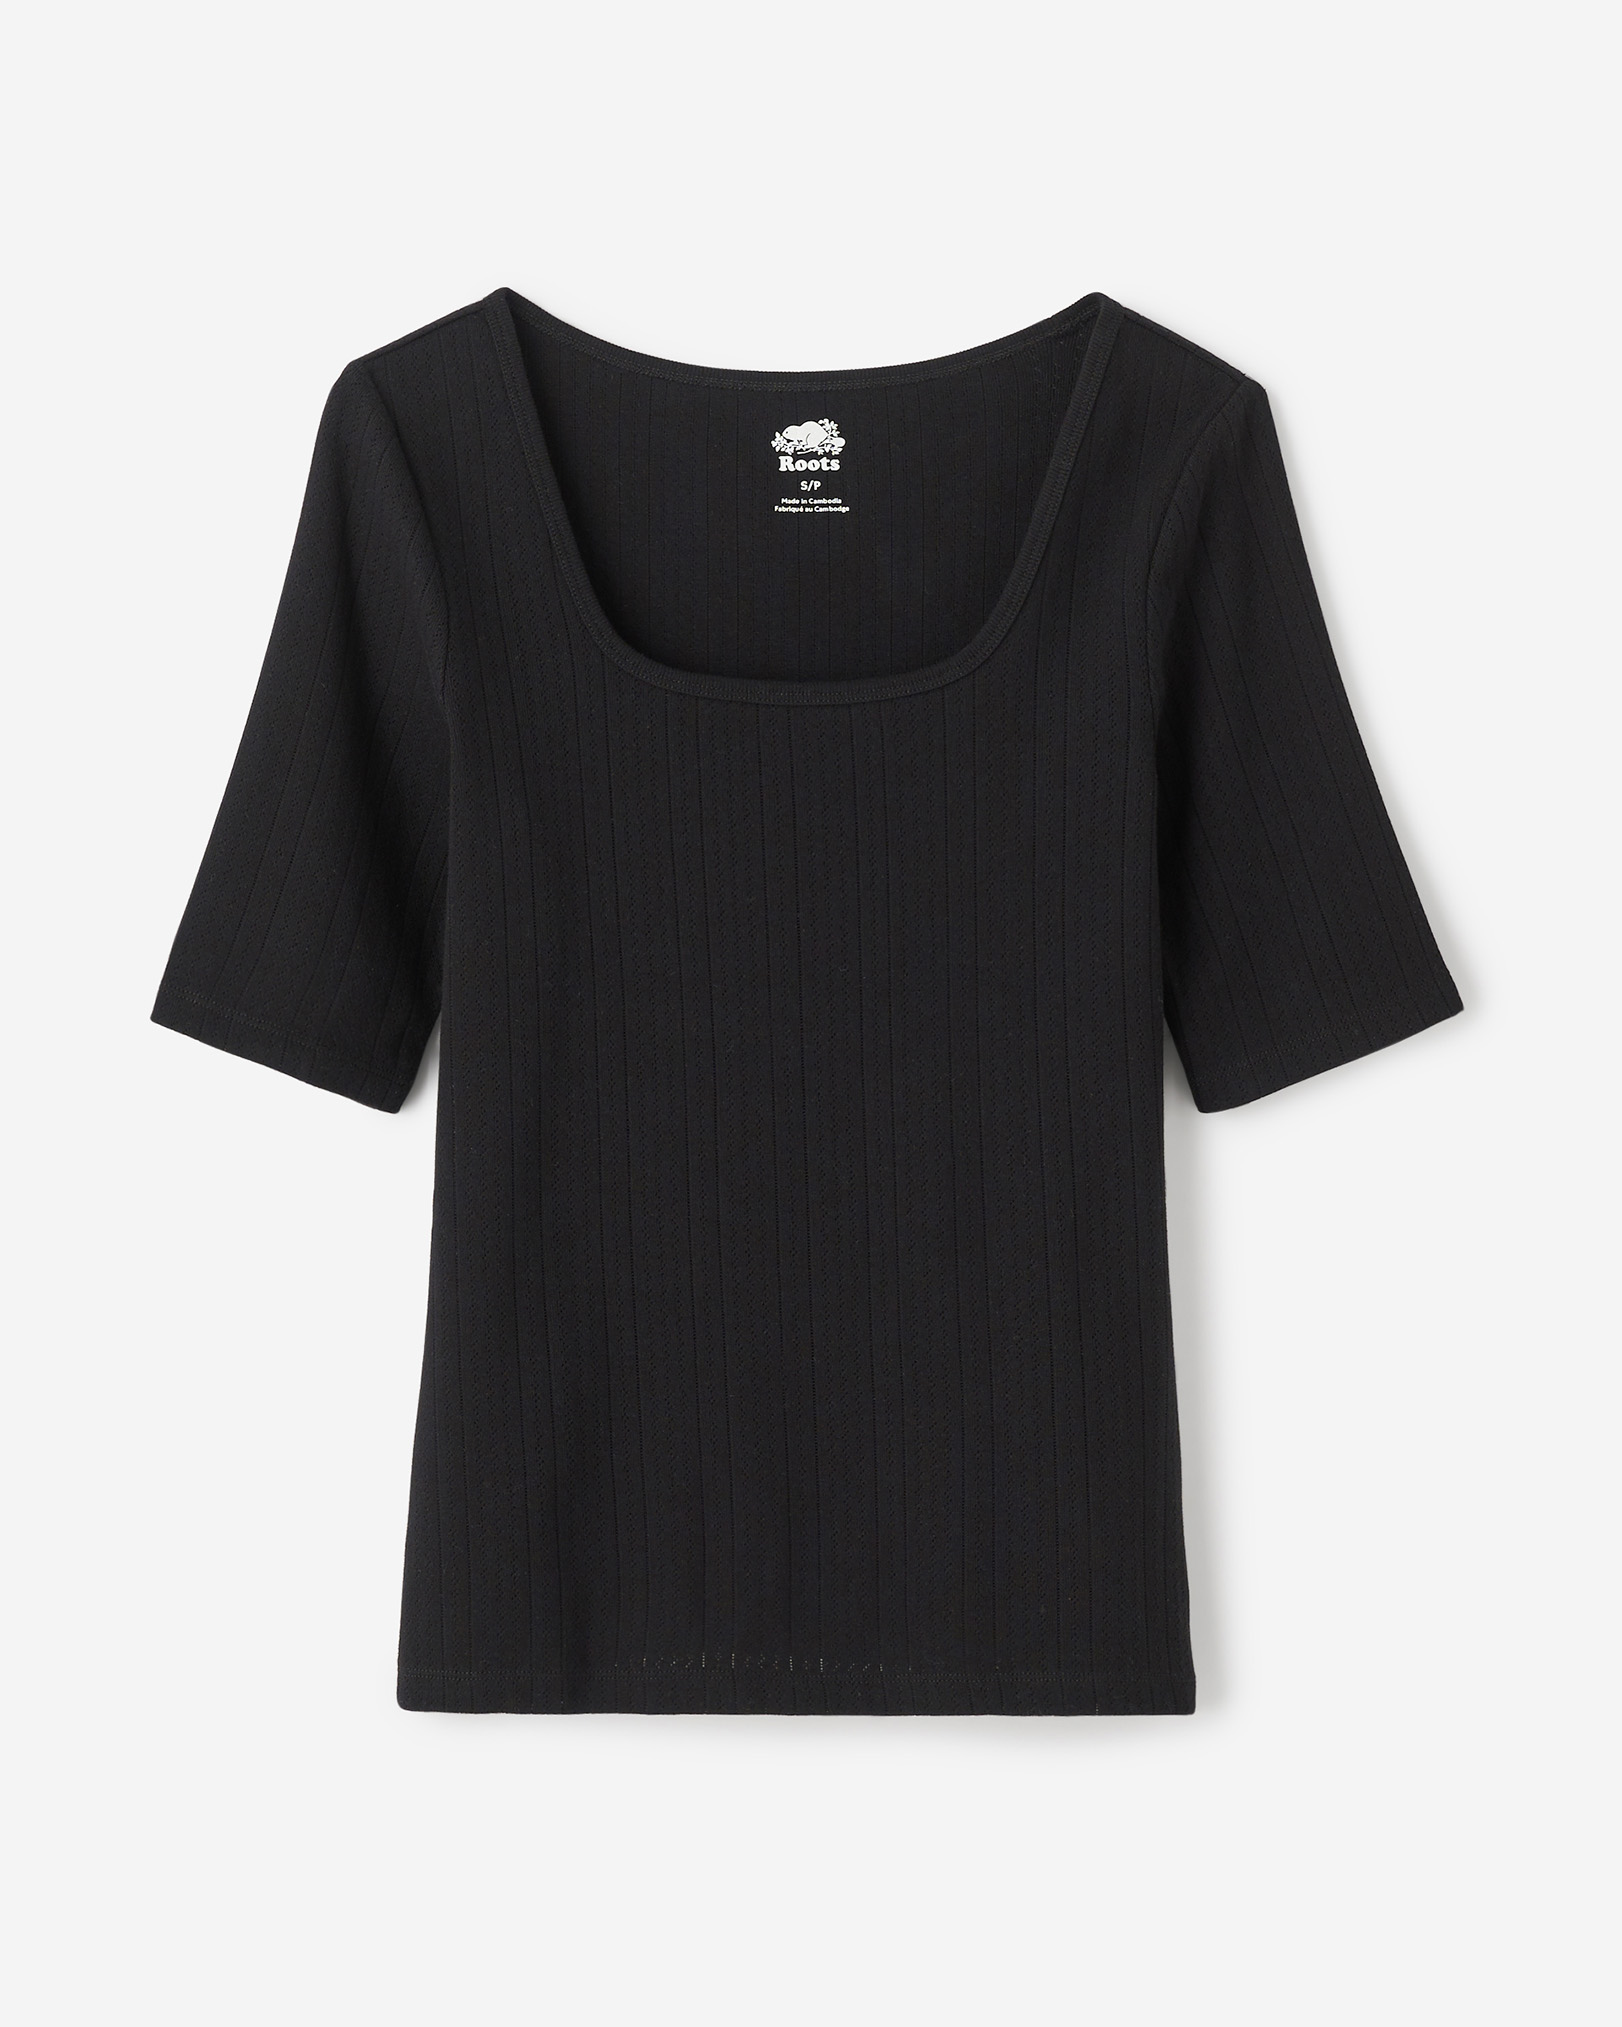 Roots Pointelle Square Neck Short Sleeve T-Shirt in